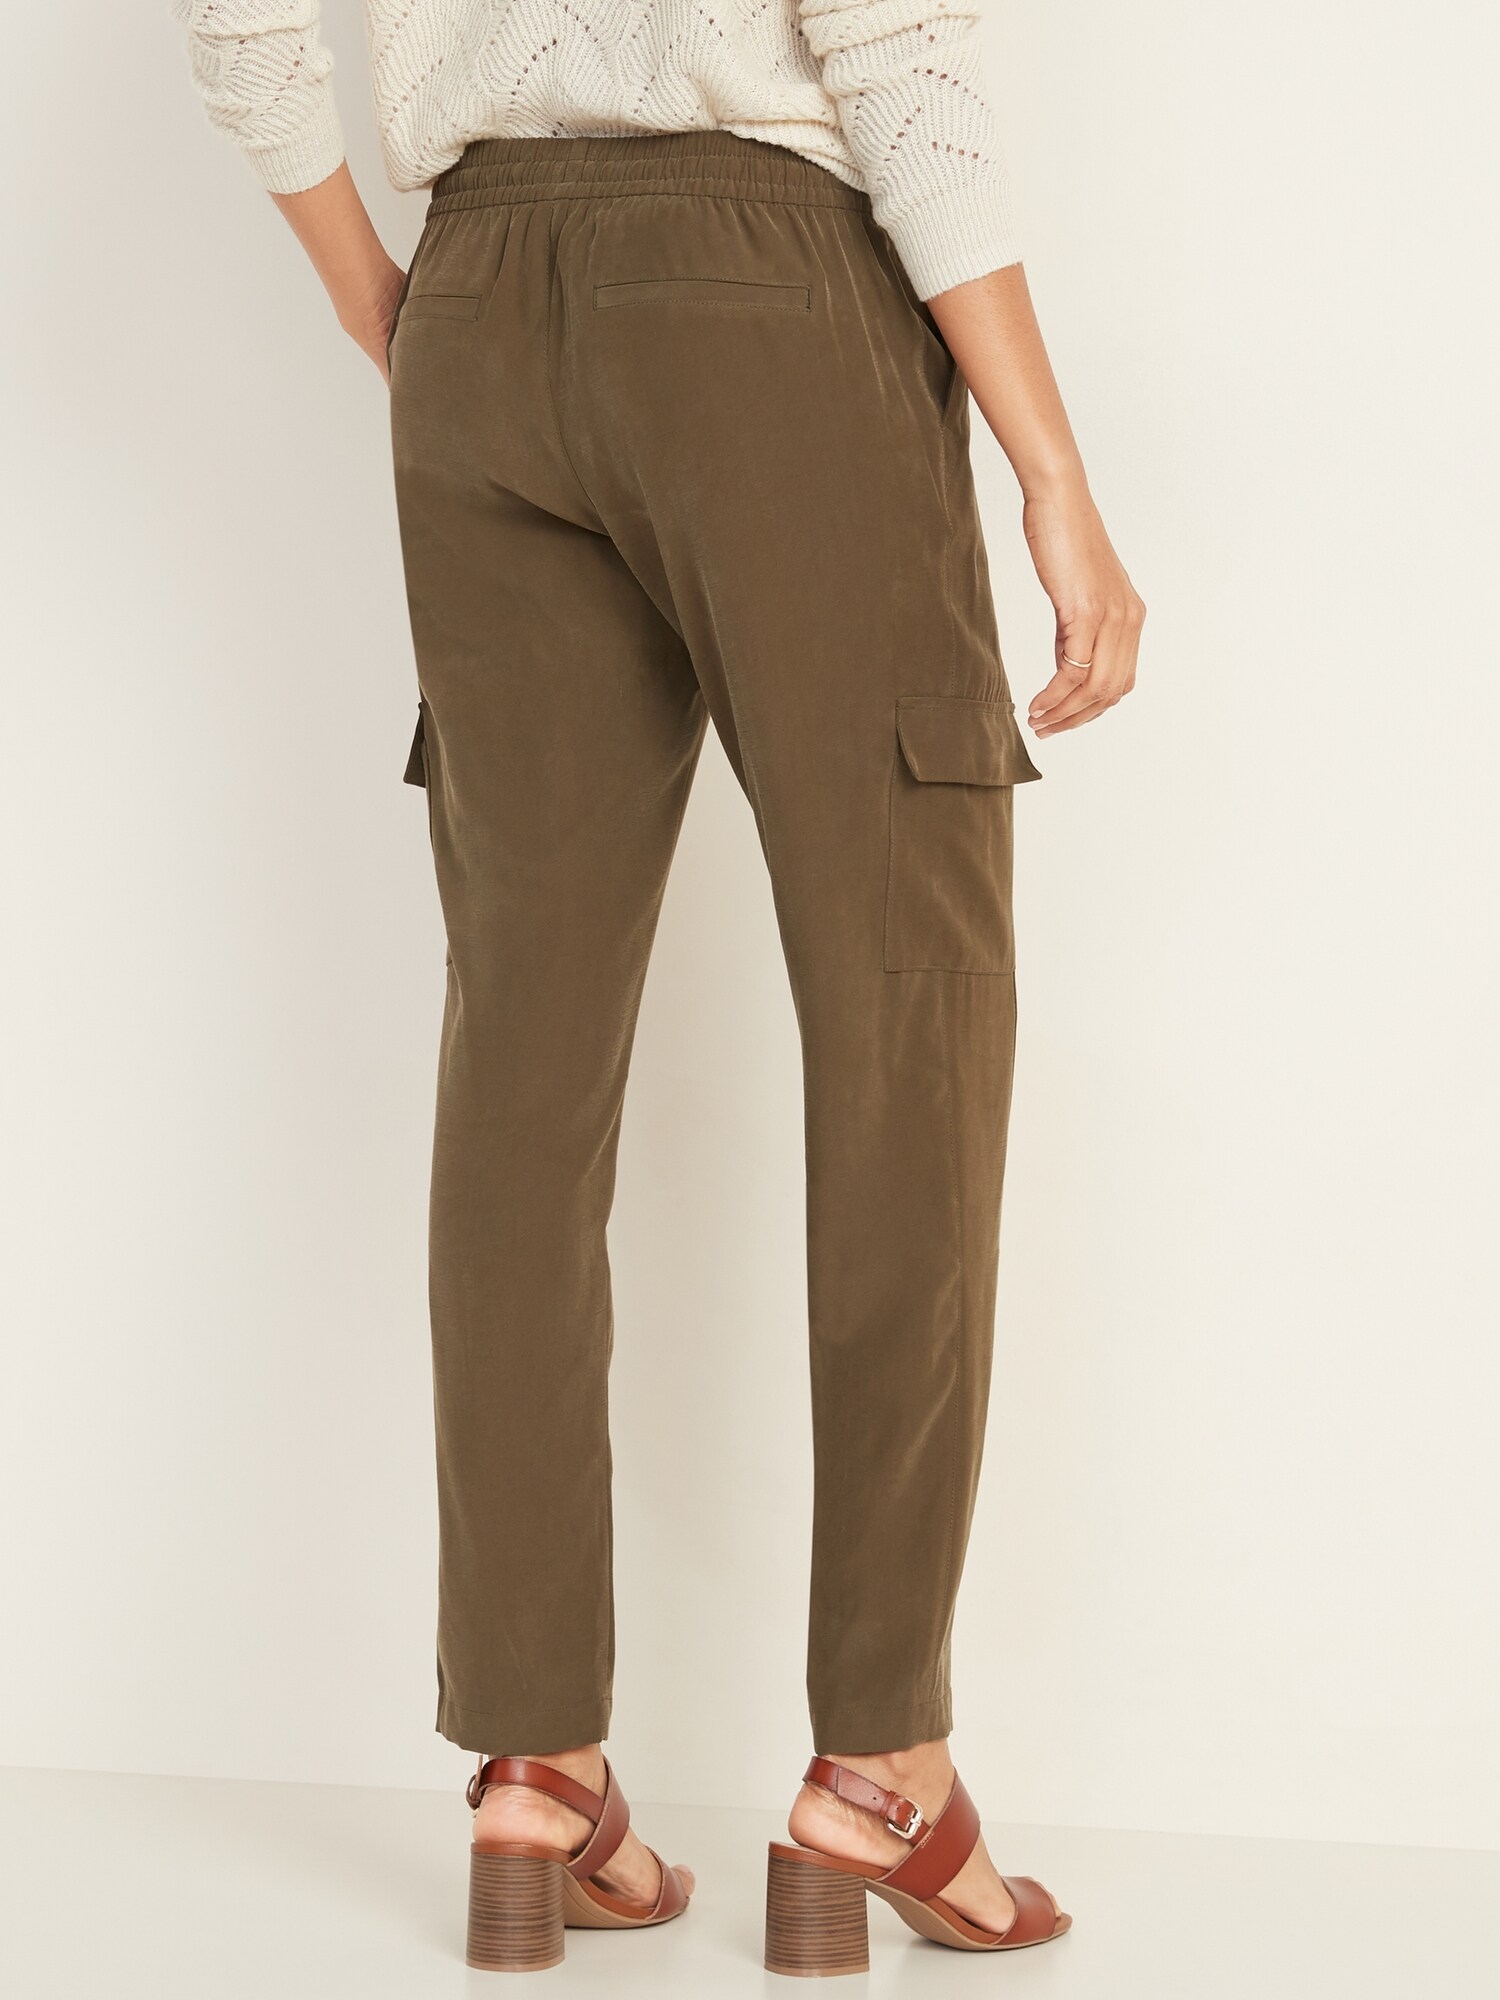 Mid-Rise Printed Soft Pants for Women | Old Navy